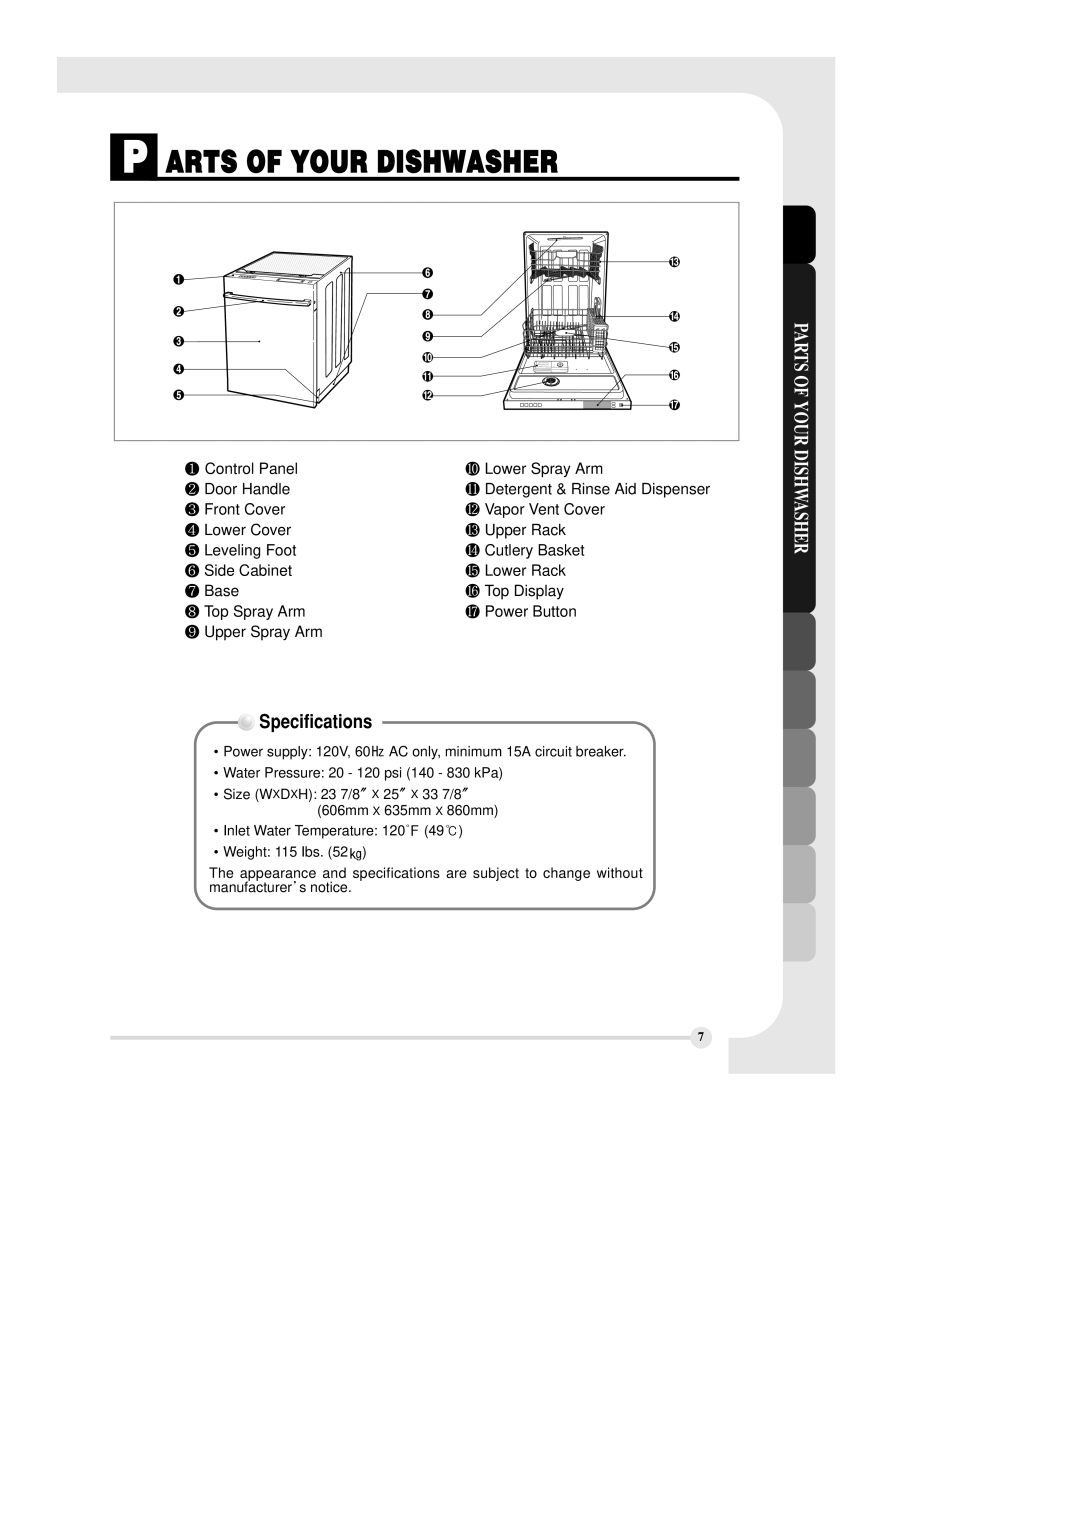 LG Electronics LDF6810ST manual P Arts Of Your Dishwasher, Specifications, Parts Of Your Dishwasher 